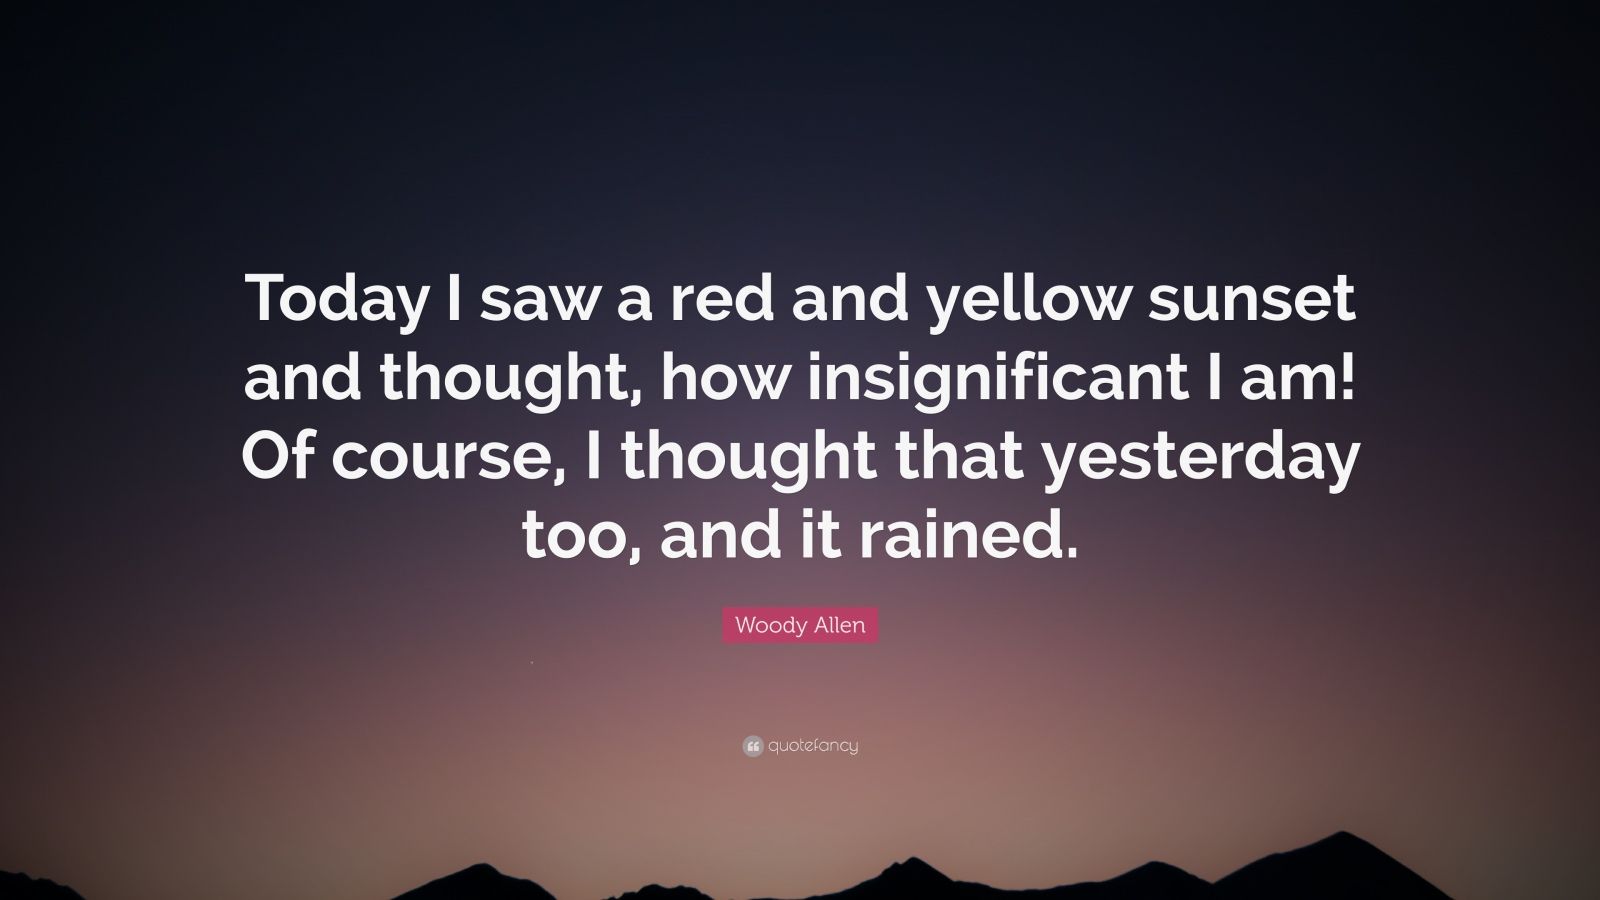 Woody Allen Quote: "Today I saw a red and yellow sunset ...